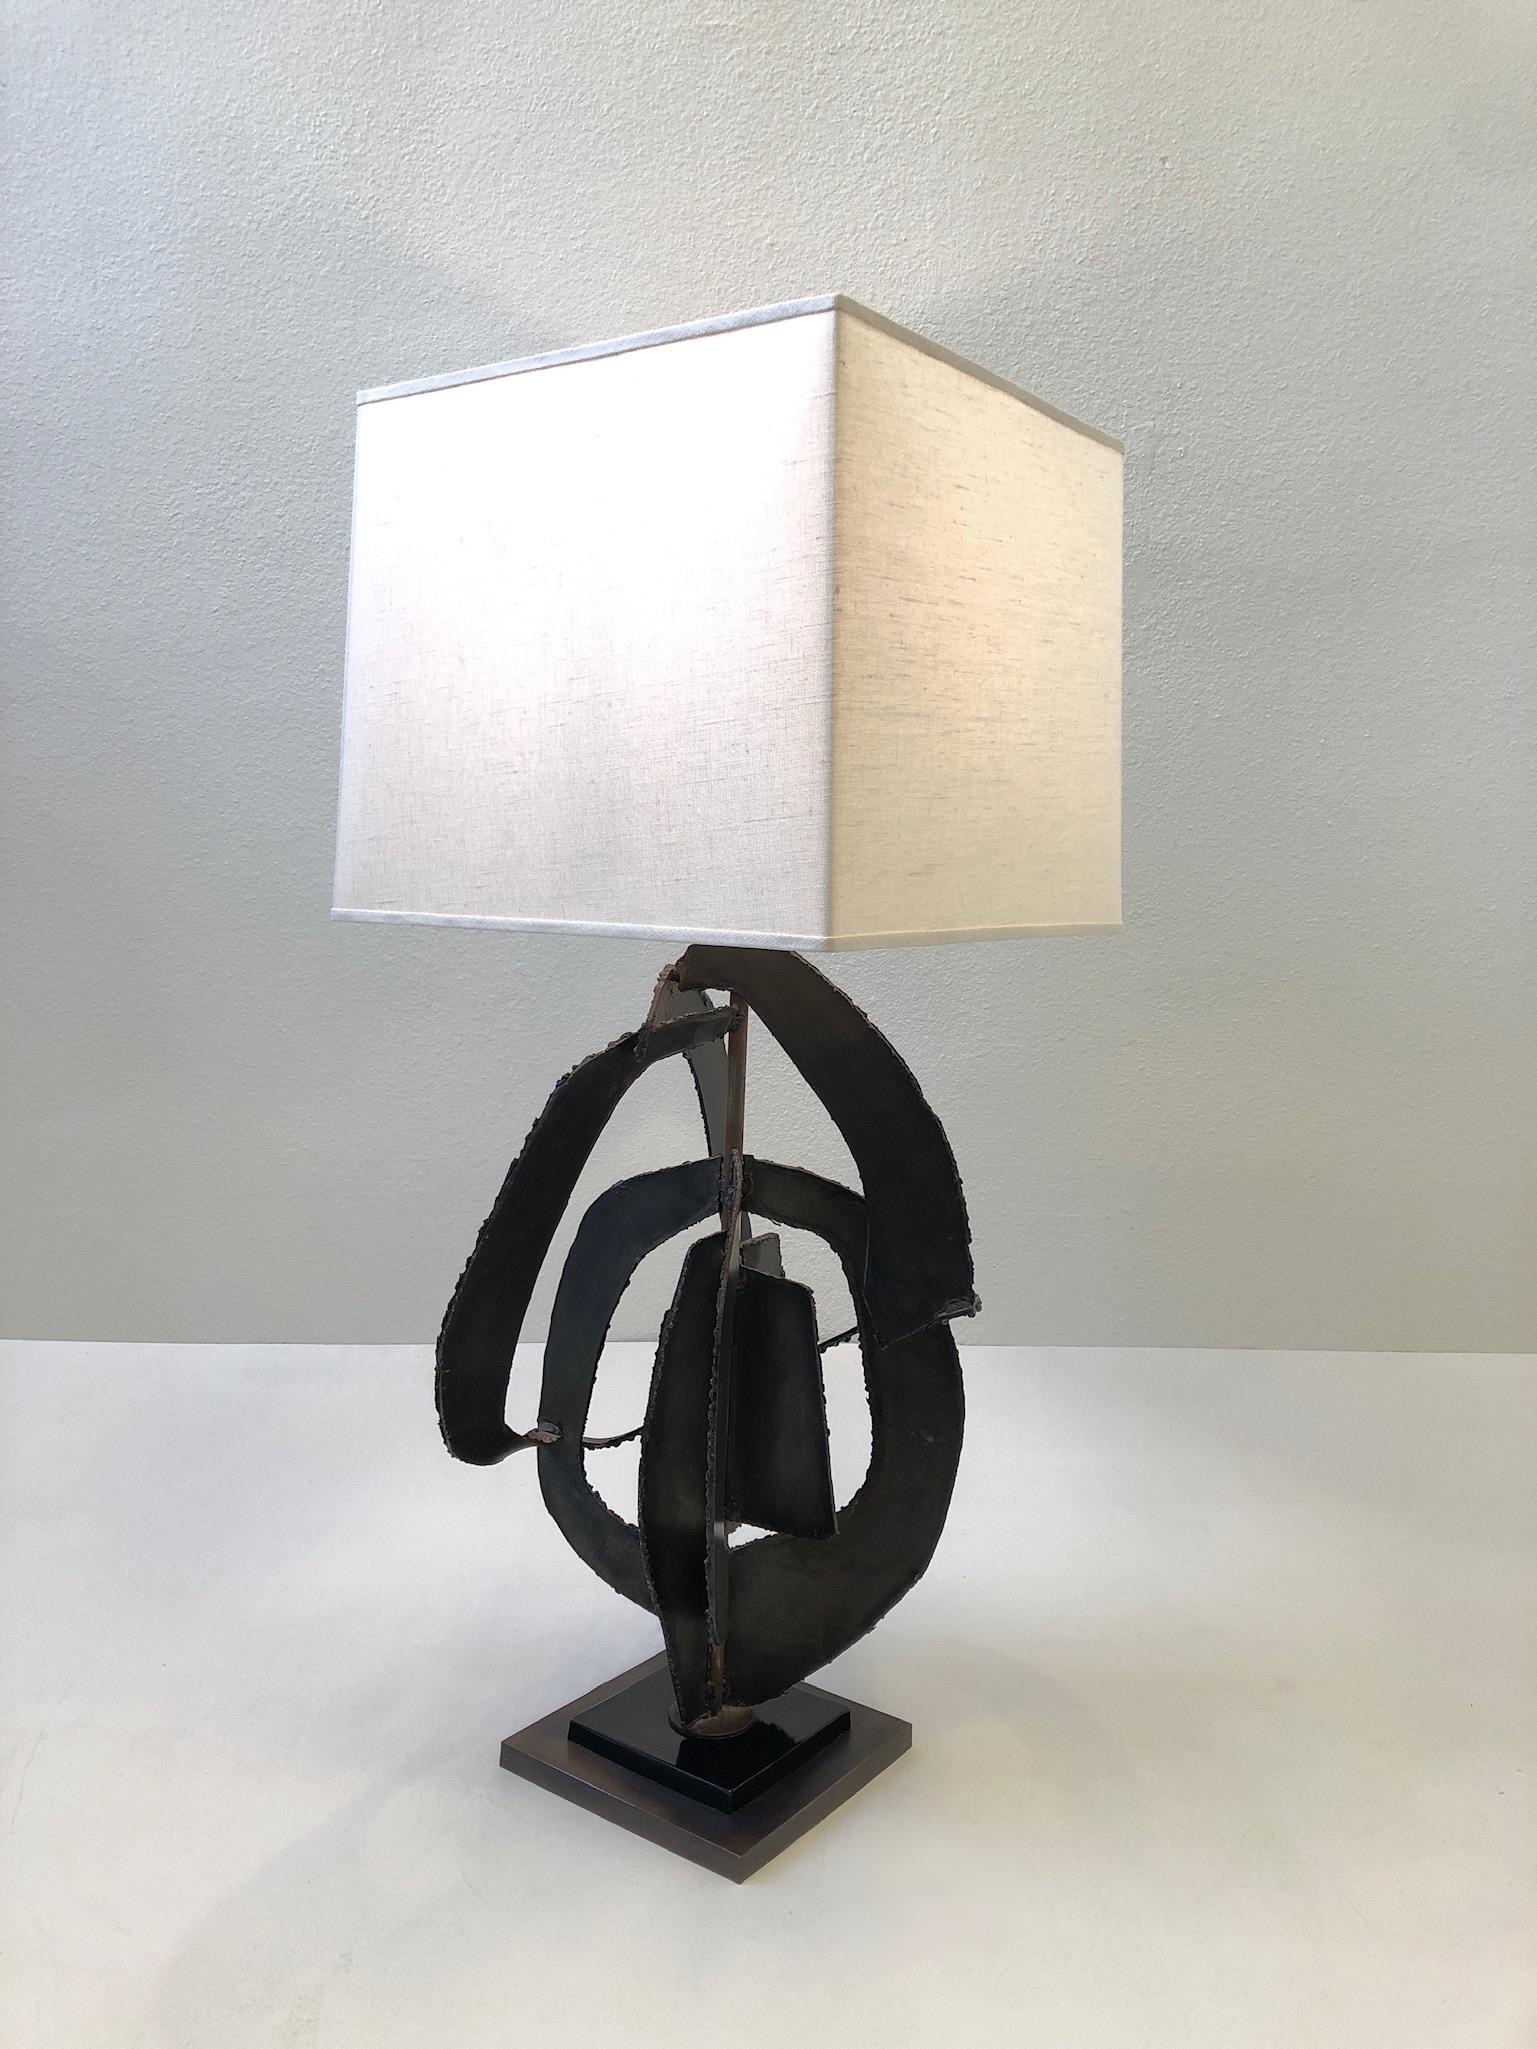 Mid-20th Century Sculptural Brutalist Steel Table Lamp by Richard Barr for Laurel Lamp Co